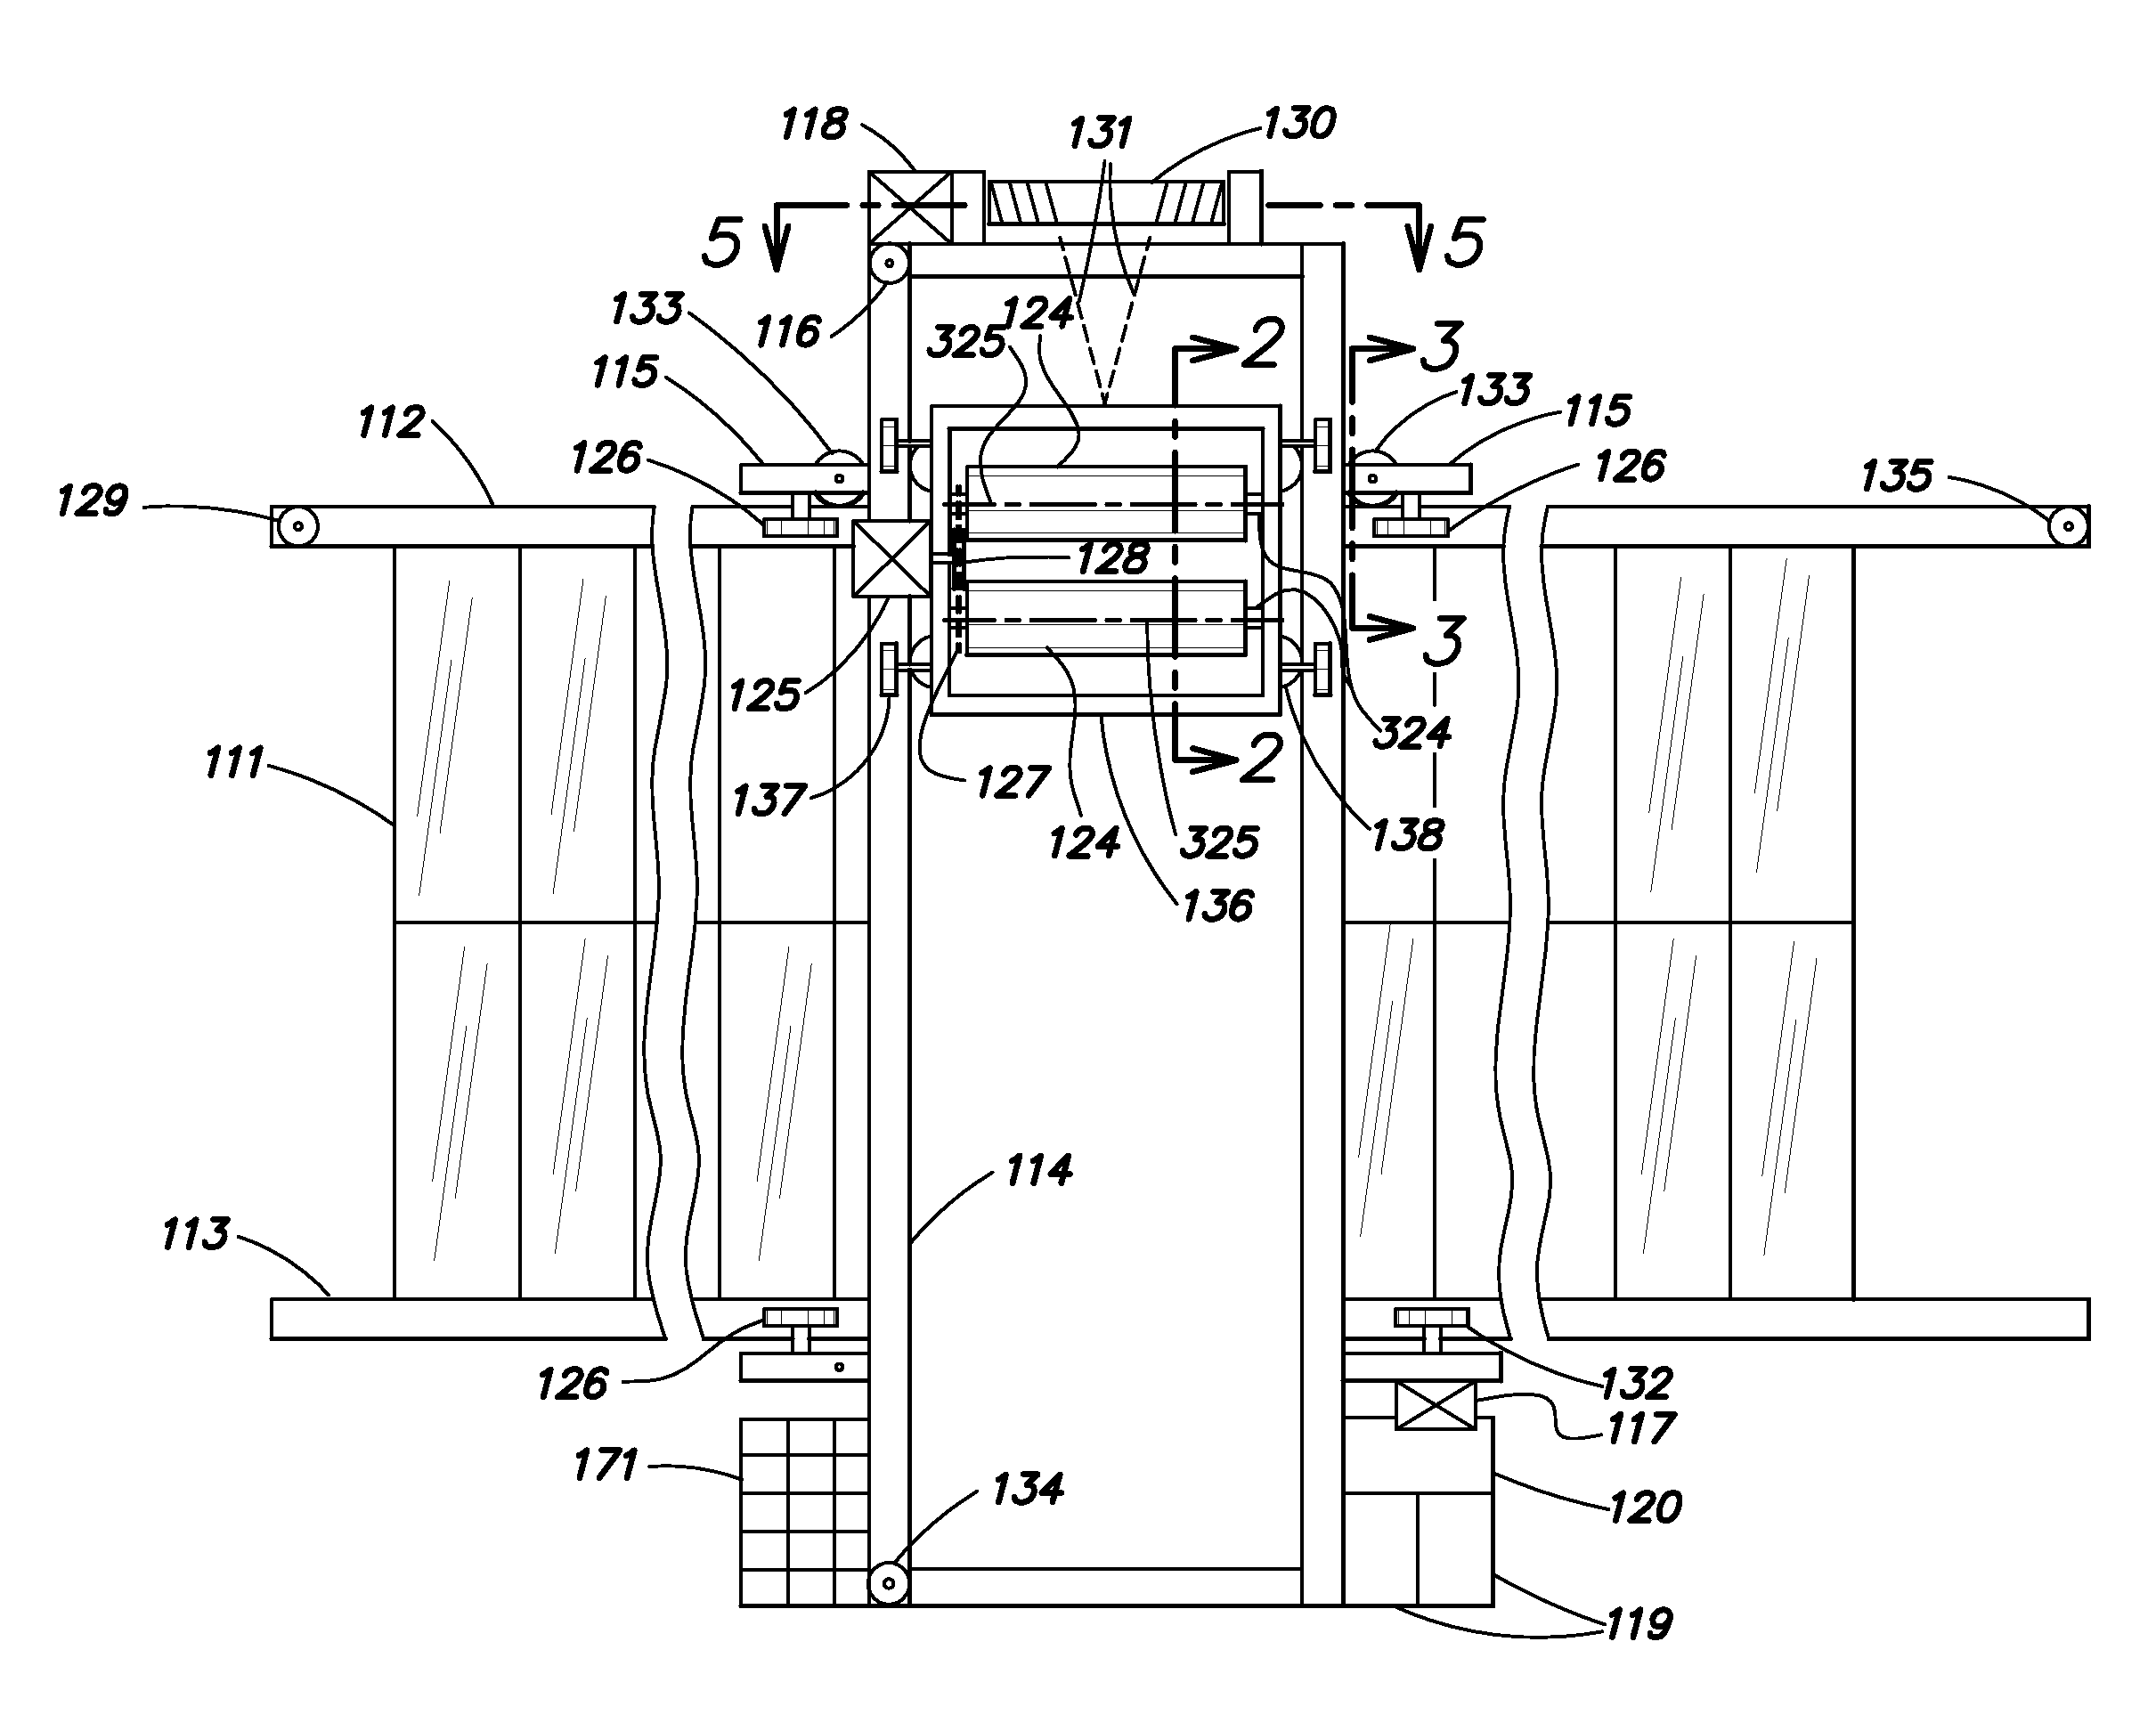 Descent control and energy recovery system for solar panel cleaning system